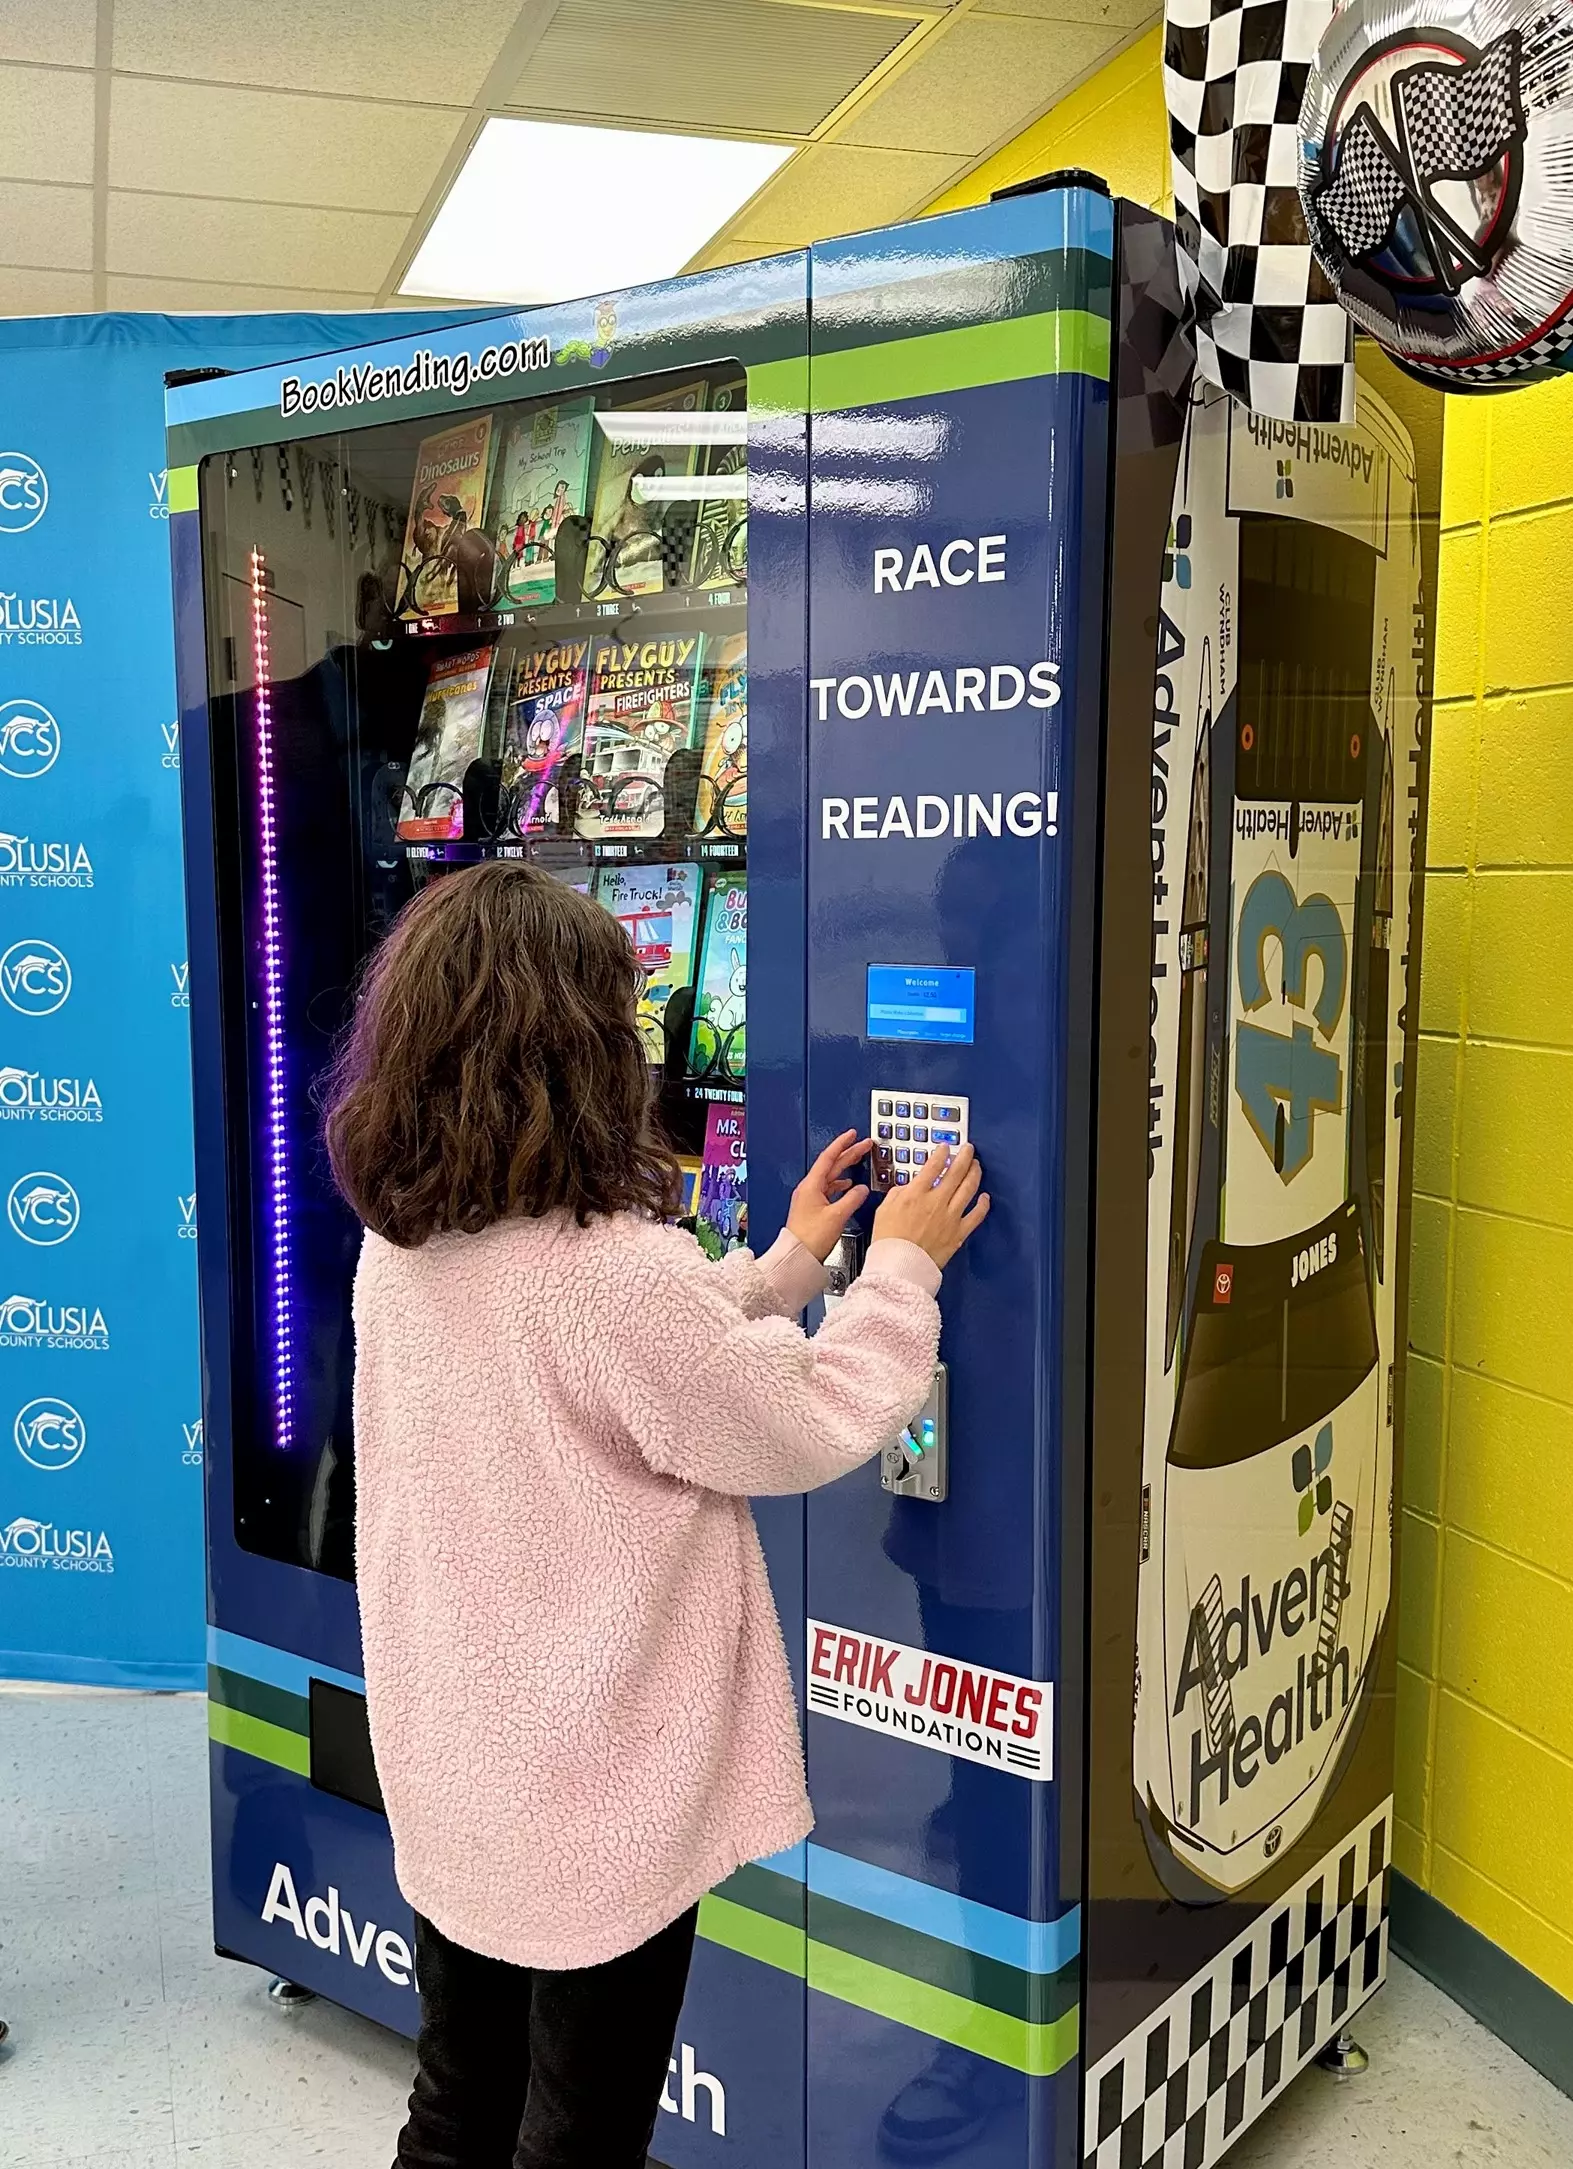 NASCAR Driver Reads to Children and Delivers a "Bookworm" Vending Machine to Local Elementary School